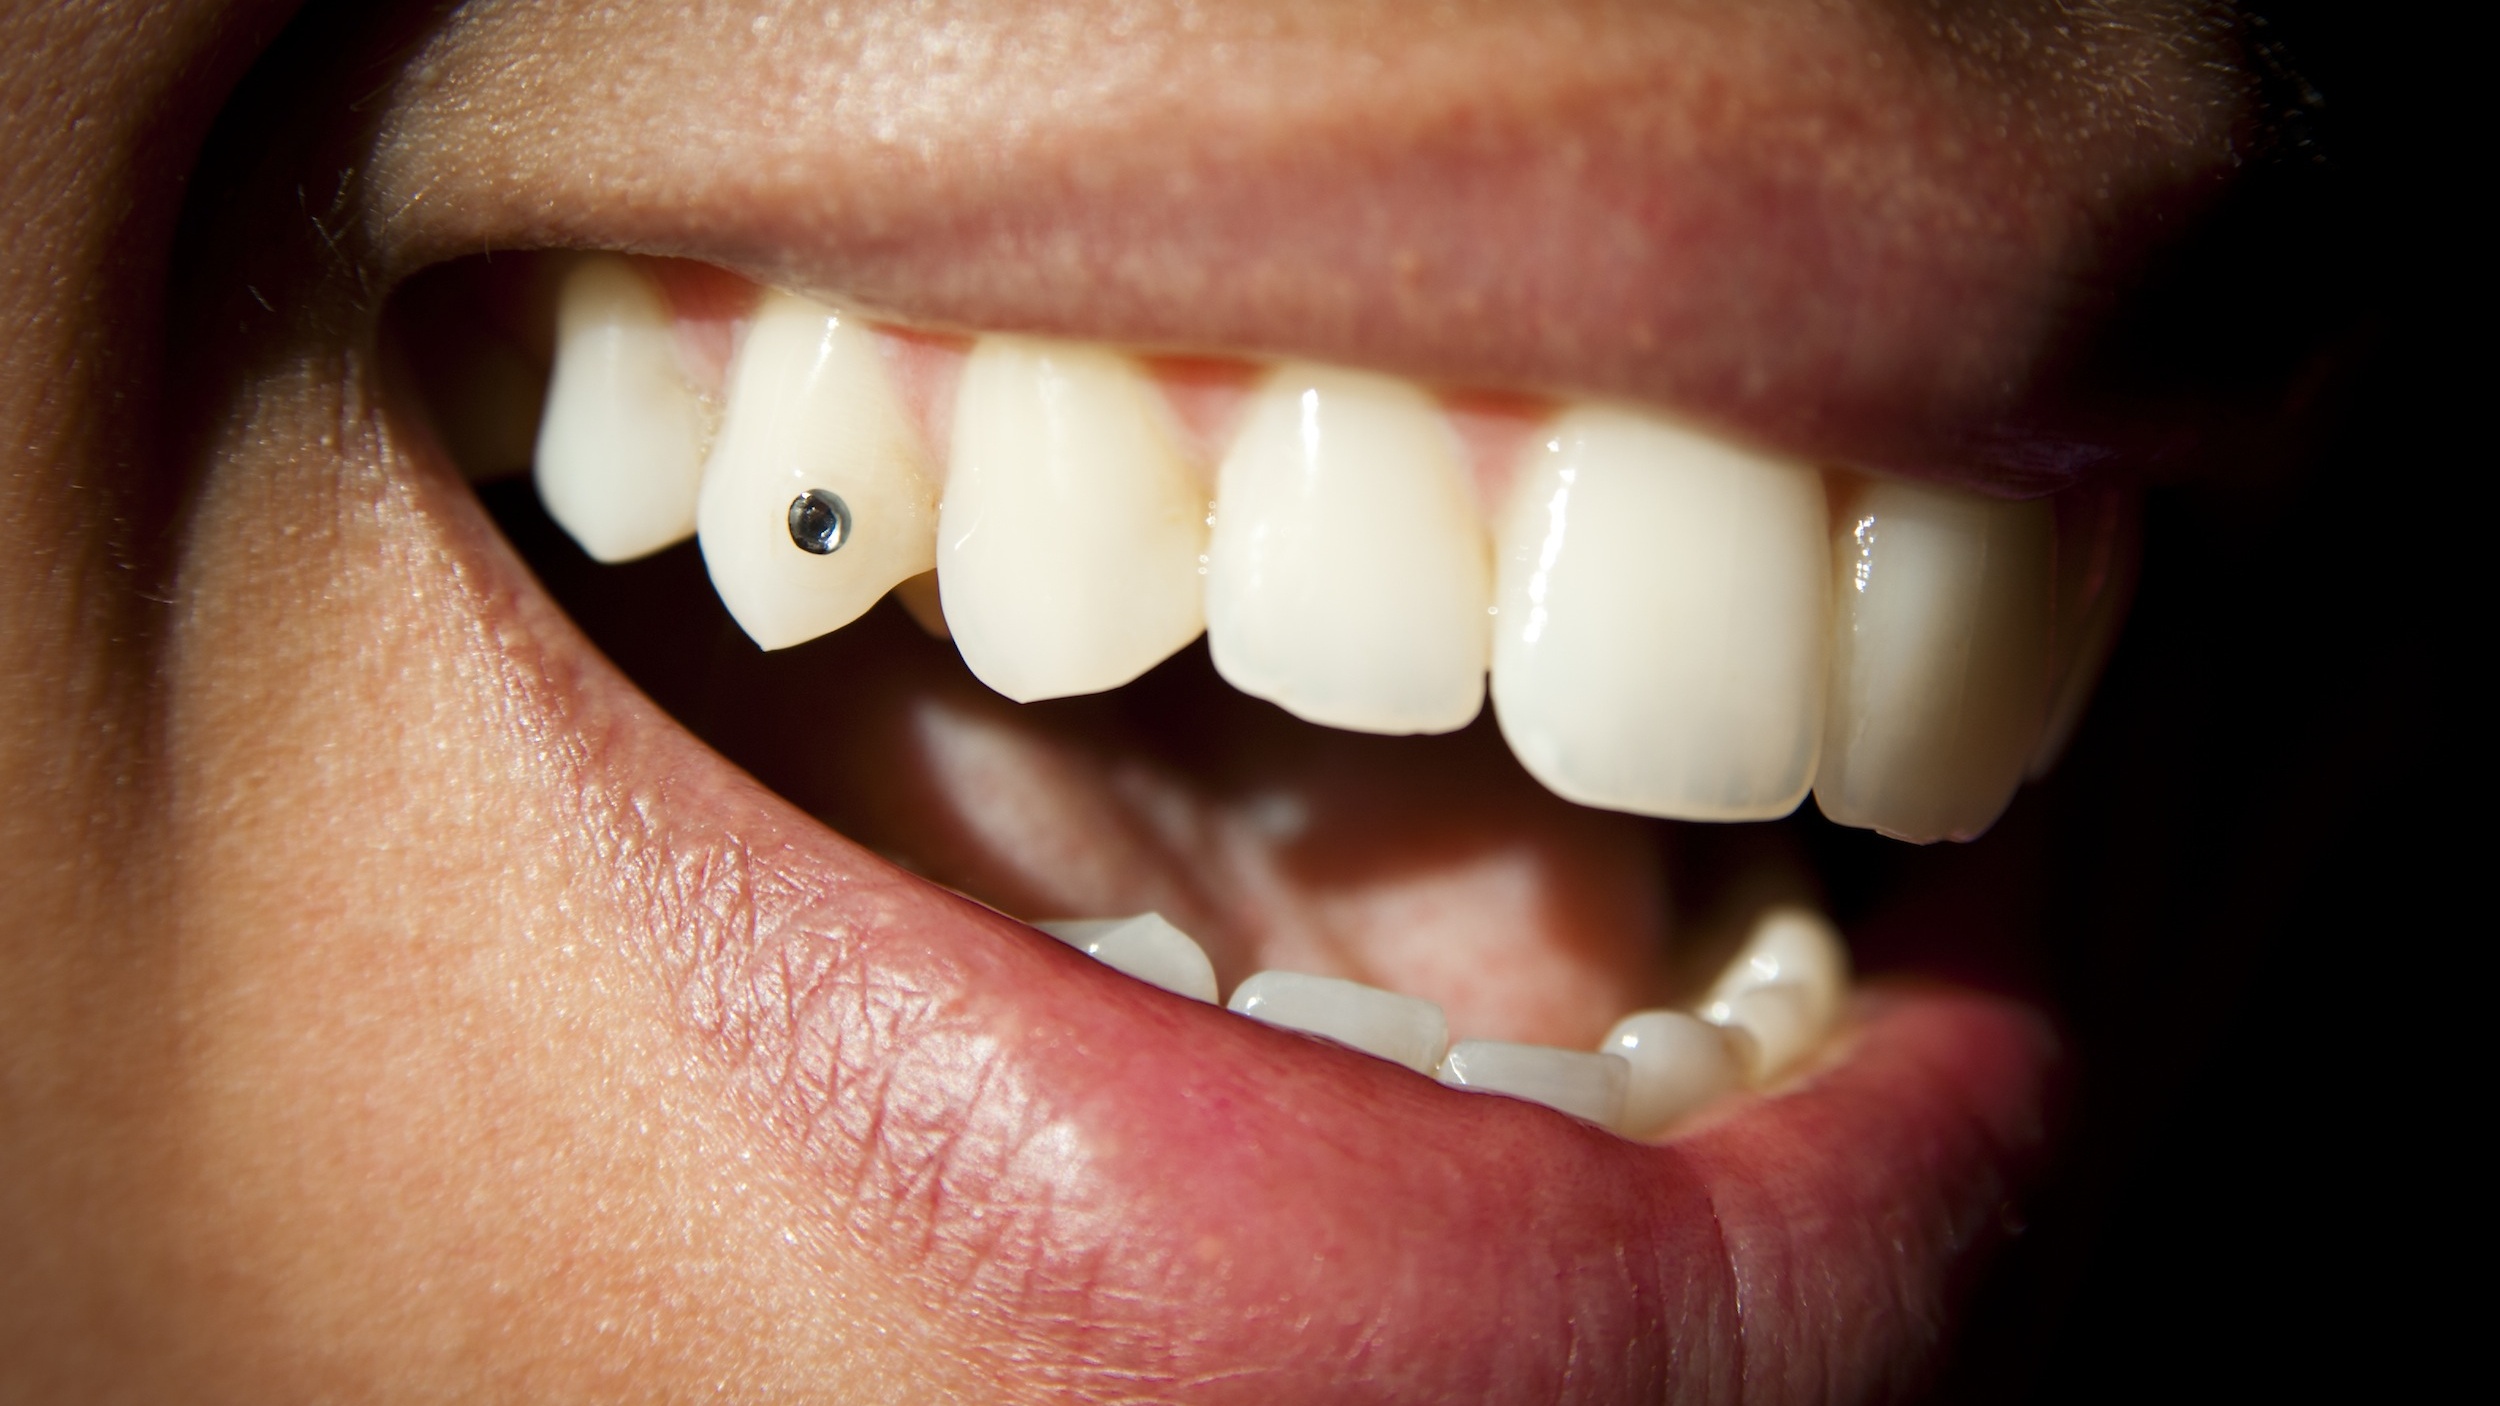 Get Your Teeth Blinged Out With Tooth Gems At GU Summit’s Beauty Supply Store